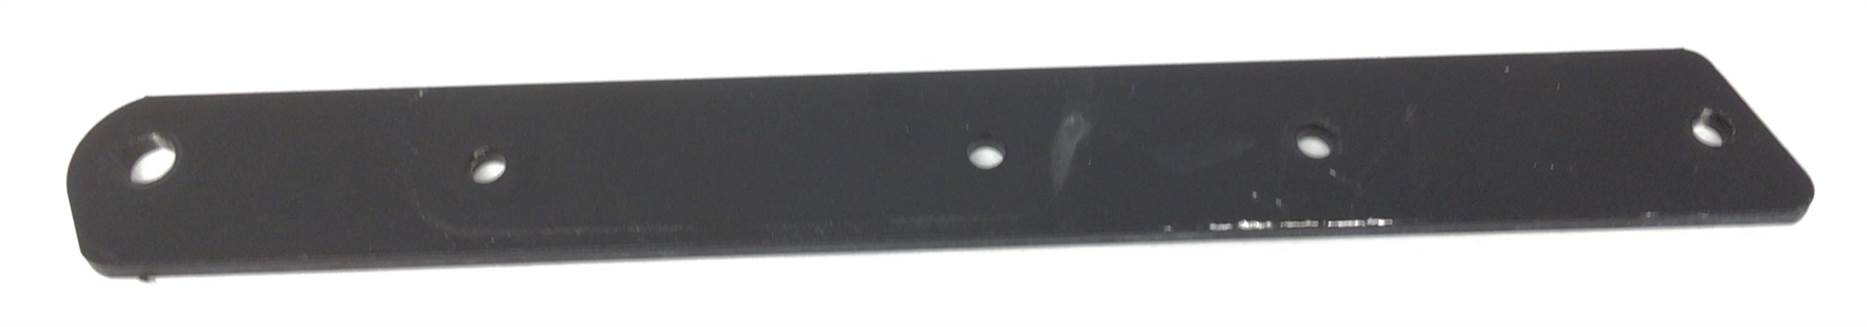 Black Guide Bracket - Right (Used)